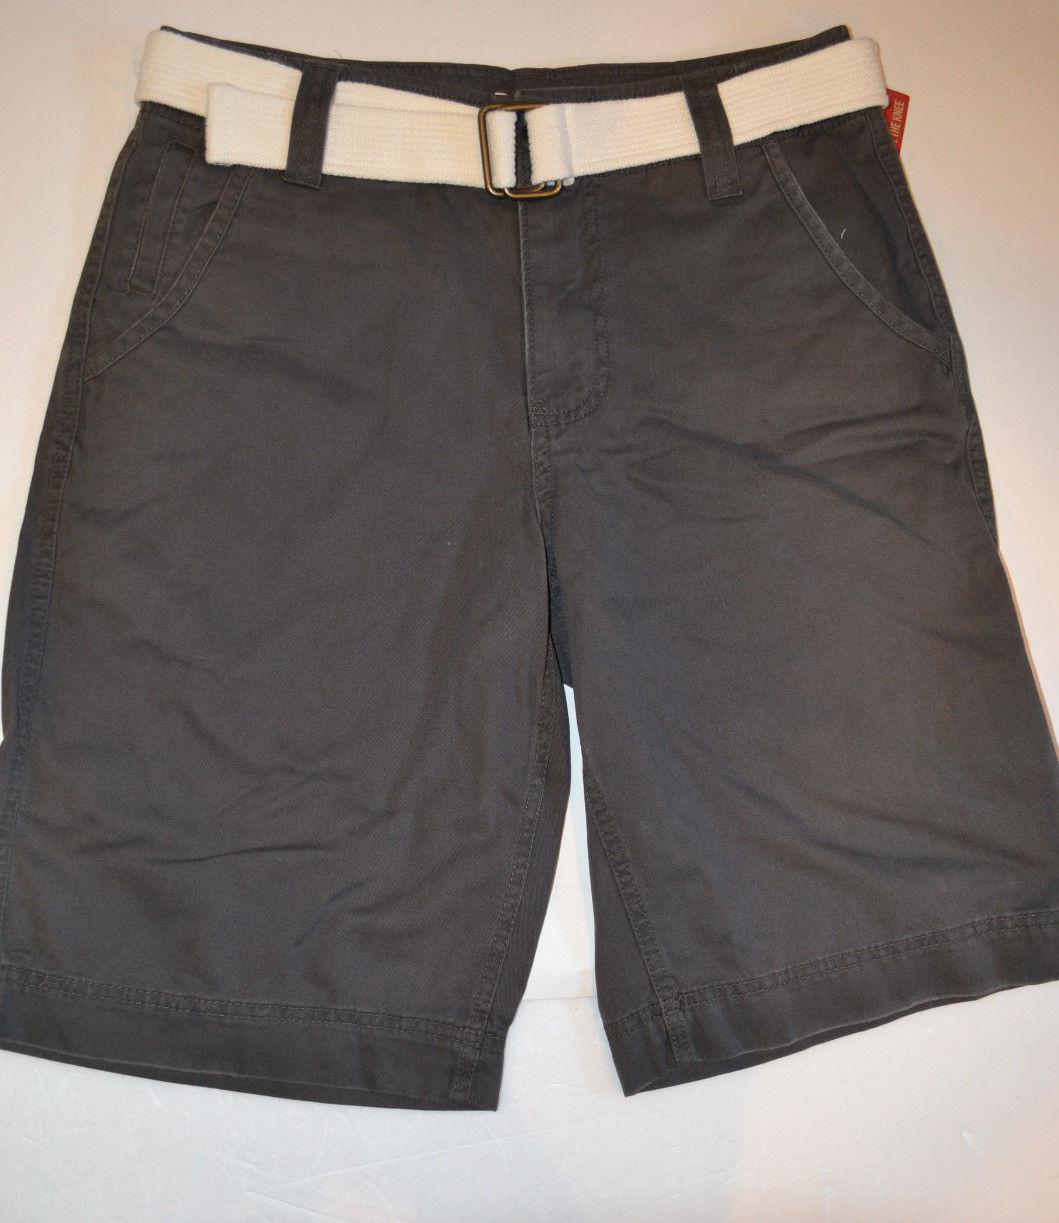 Mossimo Mens  Boys  Bark Belted Cargo Shorts  Size 30 NWT - $13.49